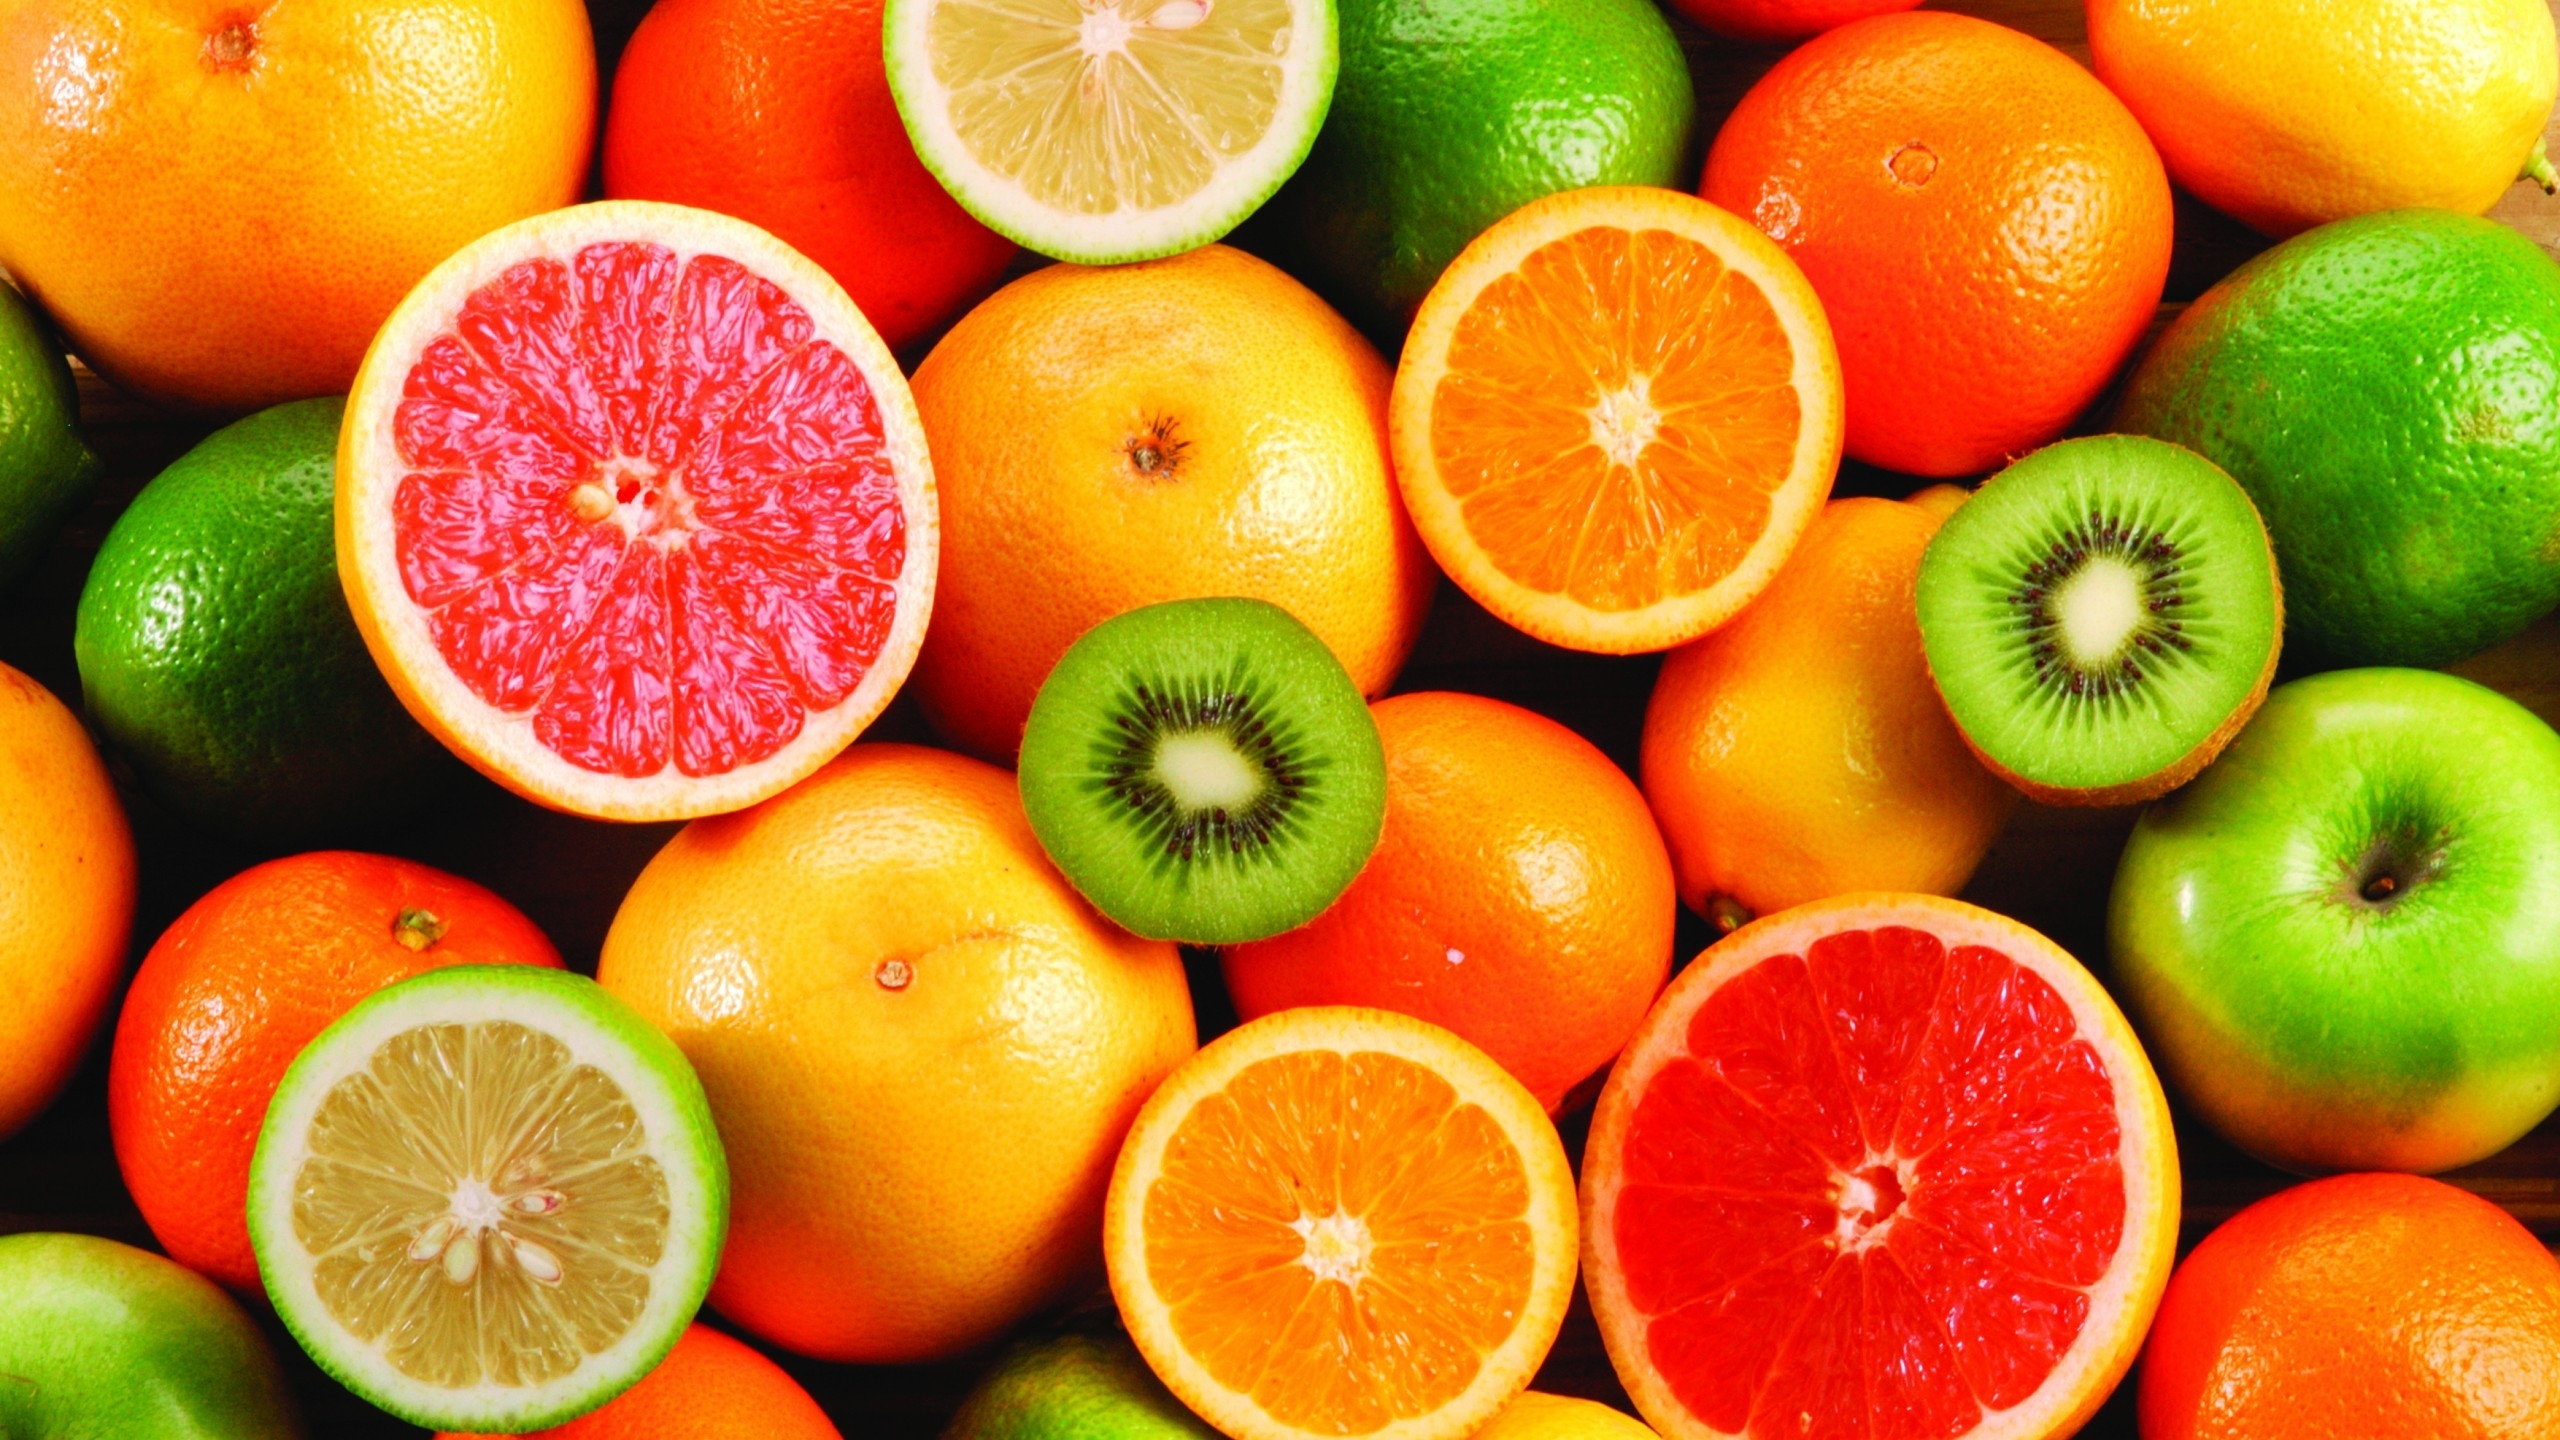 Healthy Citrus for 2560x1440 HDTV resolution